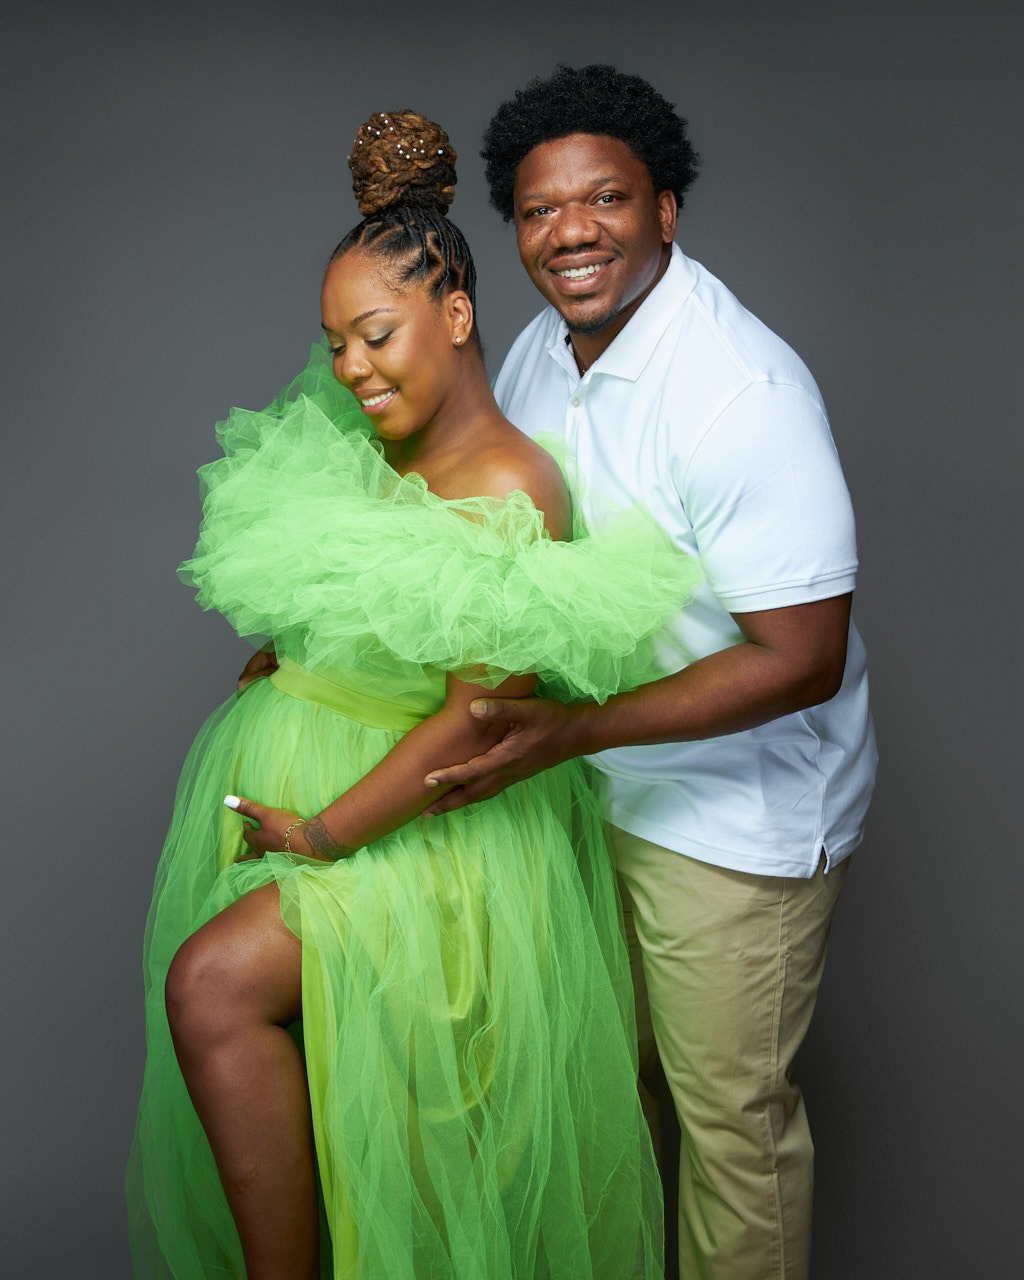 Pregnant woman of color in bright green materbity dress with husband. Maternity portrait photographer near Washington DC  Portraits by Jared Wolfe in Alexandria VA